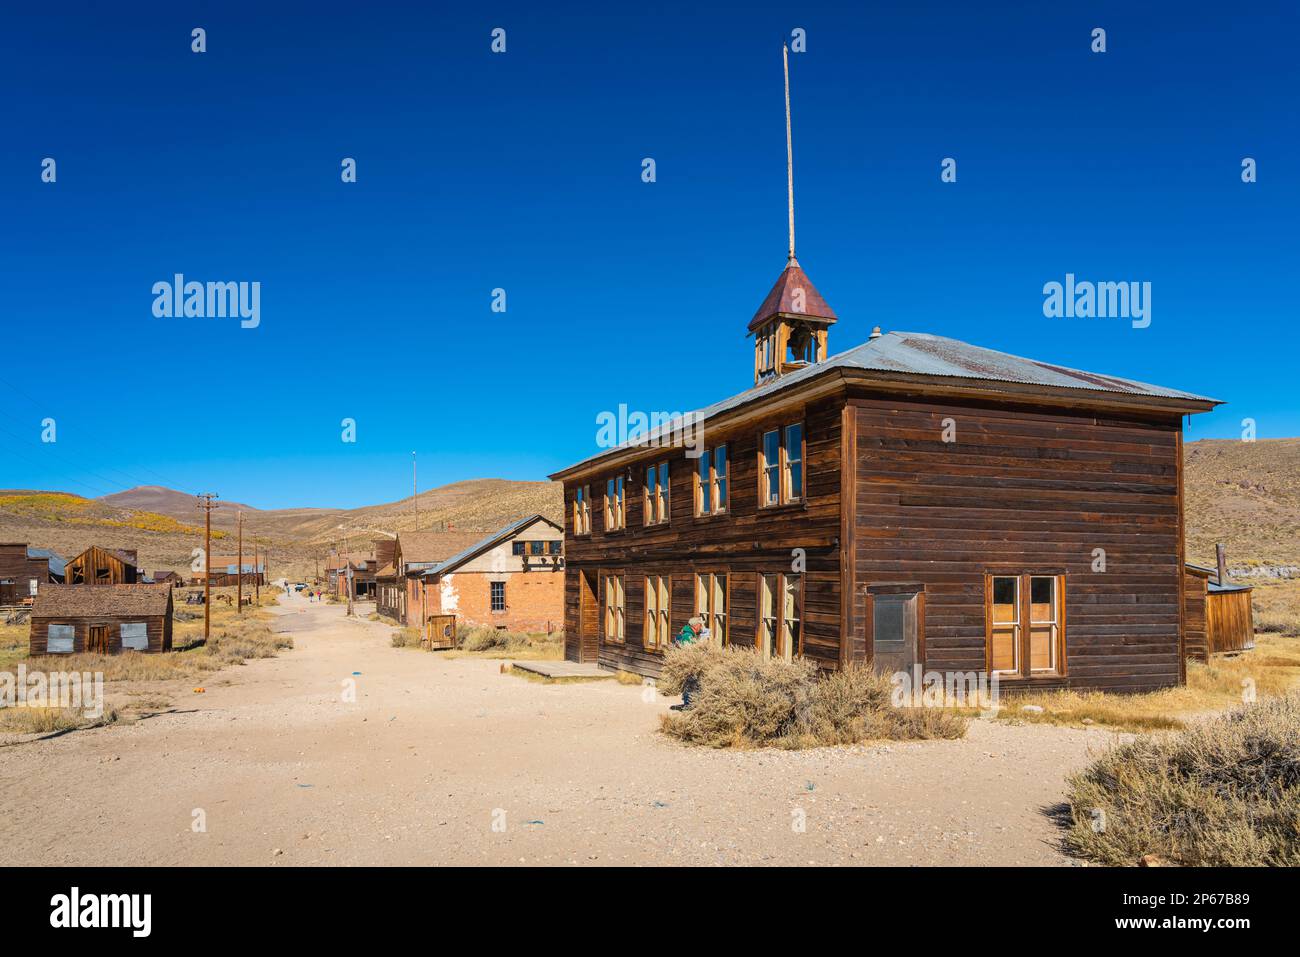 Abandoned wooden deserted buildings in Bodie ghost town, Mono County, Sierra Nevada, Eastern California, California, United States of America Stock Photo